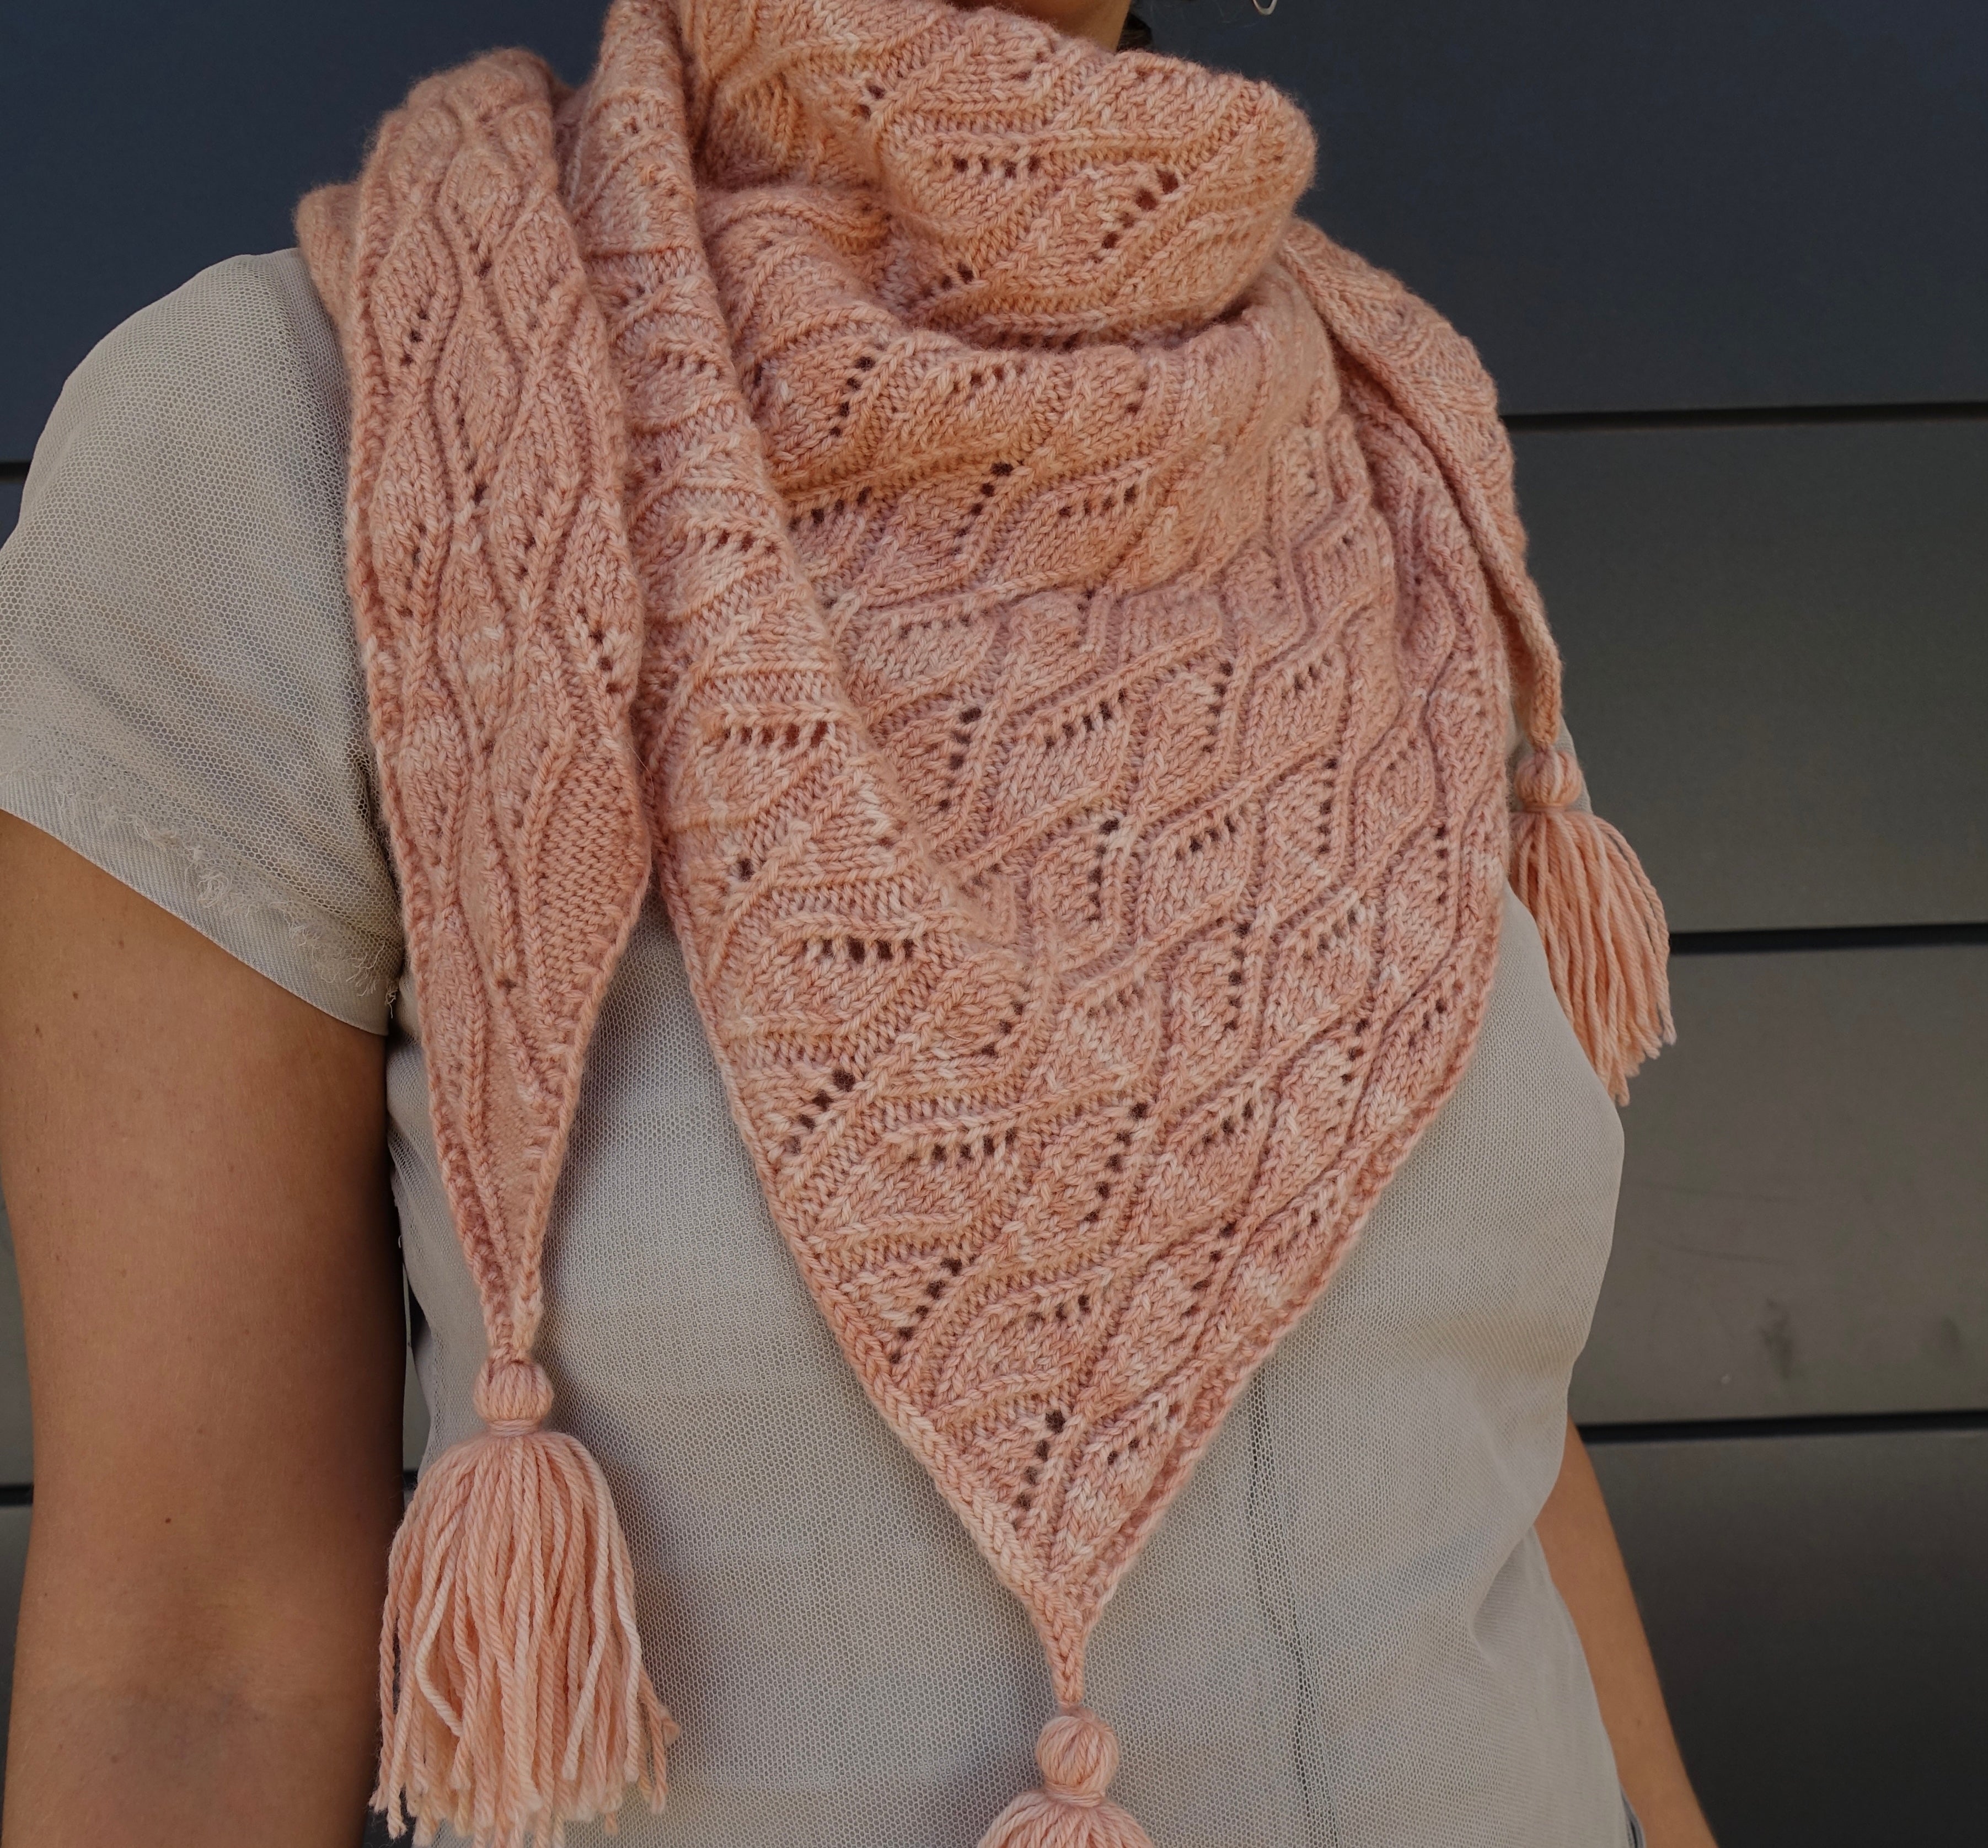 Excelso Wrap by Vera Marcu - Pattern Only